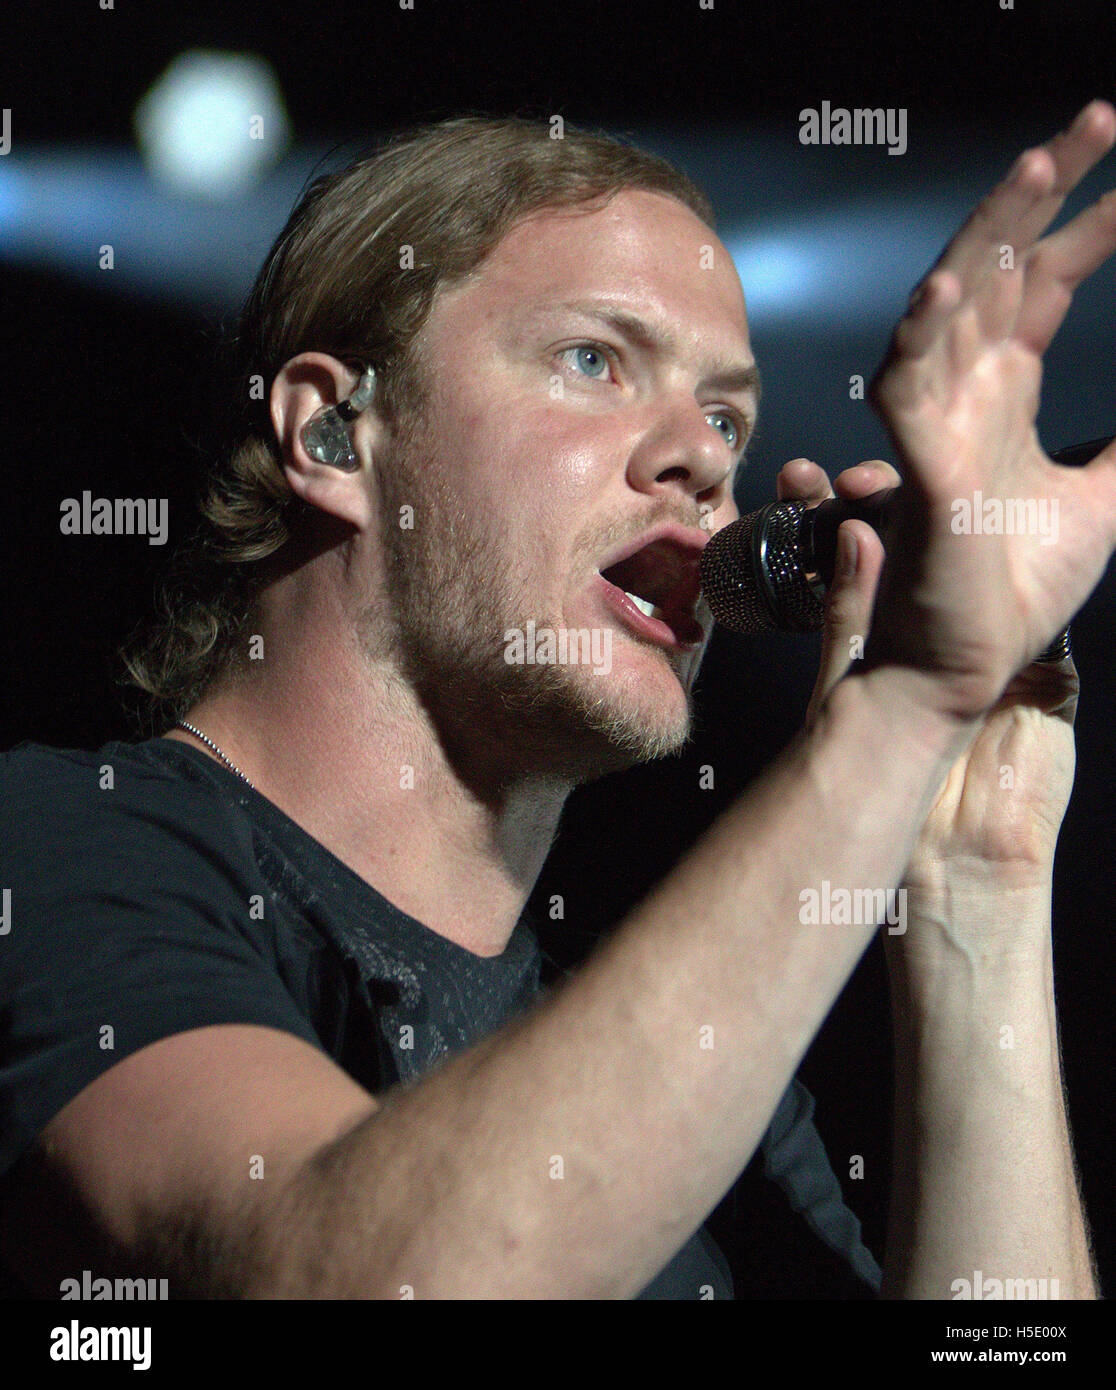 Singer Dan Reynolds of Imagine Dragons performs at Life is Beautiful Music Festival Day 2 on September 26th, 2015 in Las Vegas, Nevada. Stock Photo